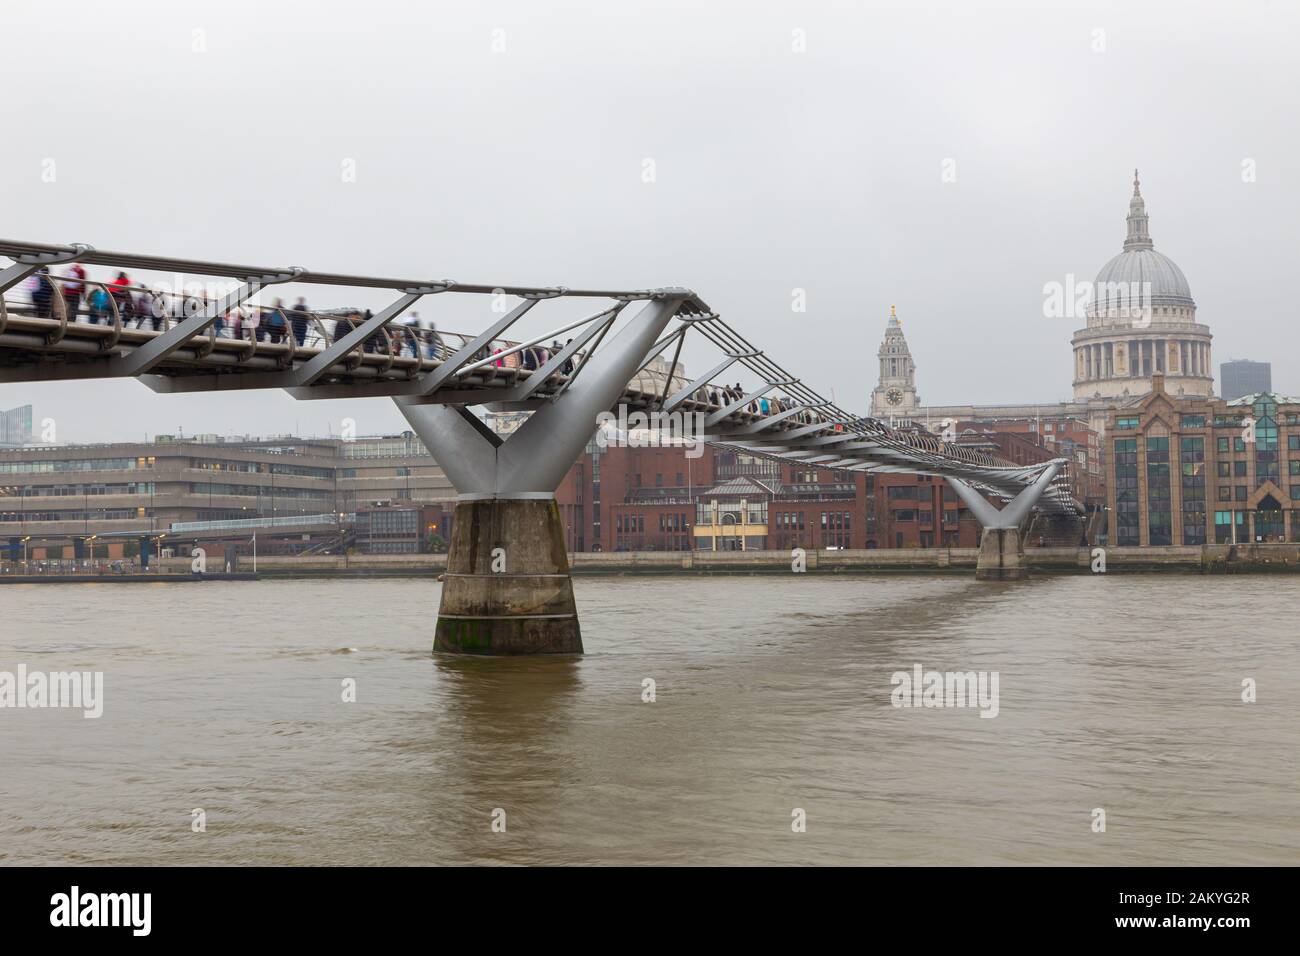 Urban view of London with Millennium bridge, St. Paul Cathedral and Thames river in a cloudy day. Stock Photo